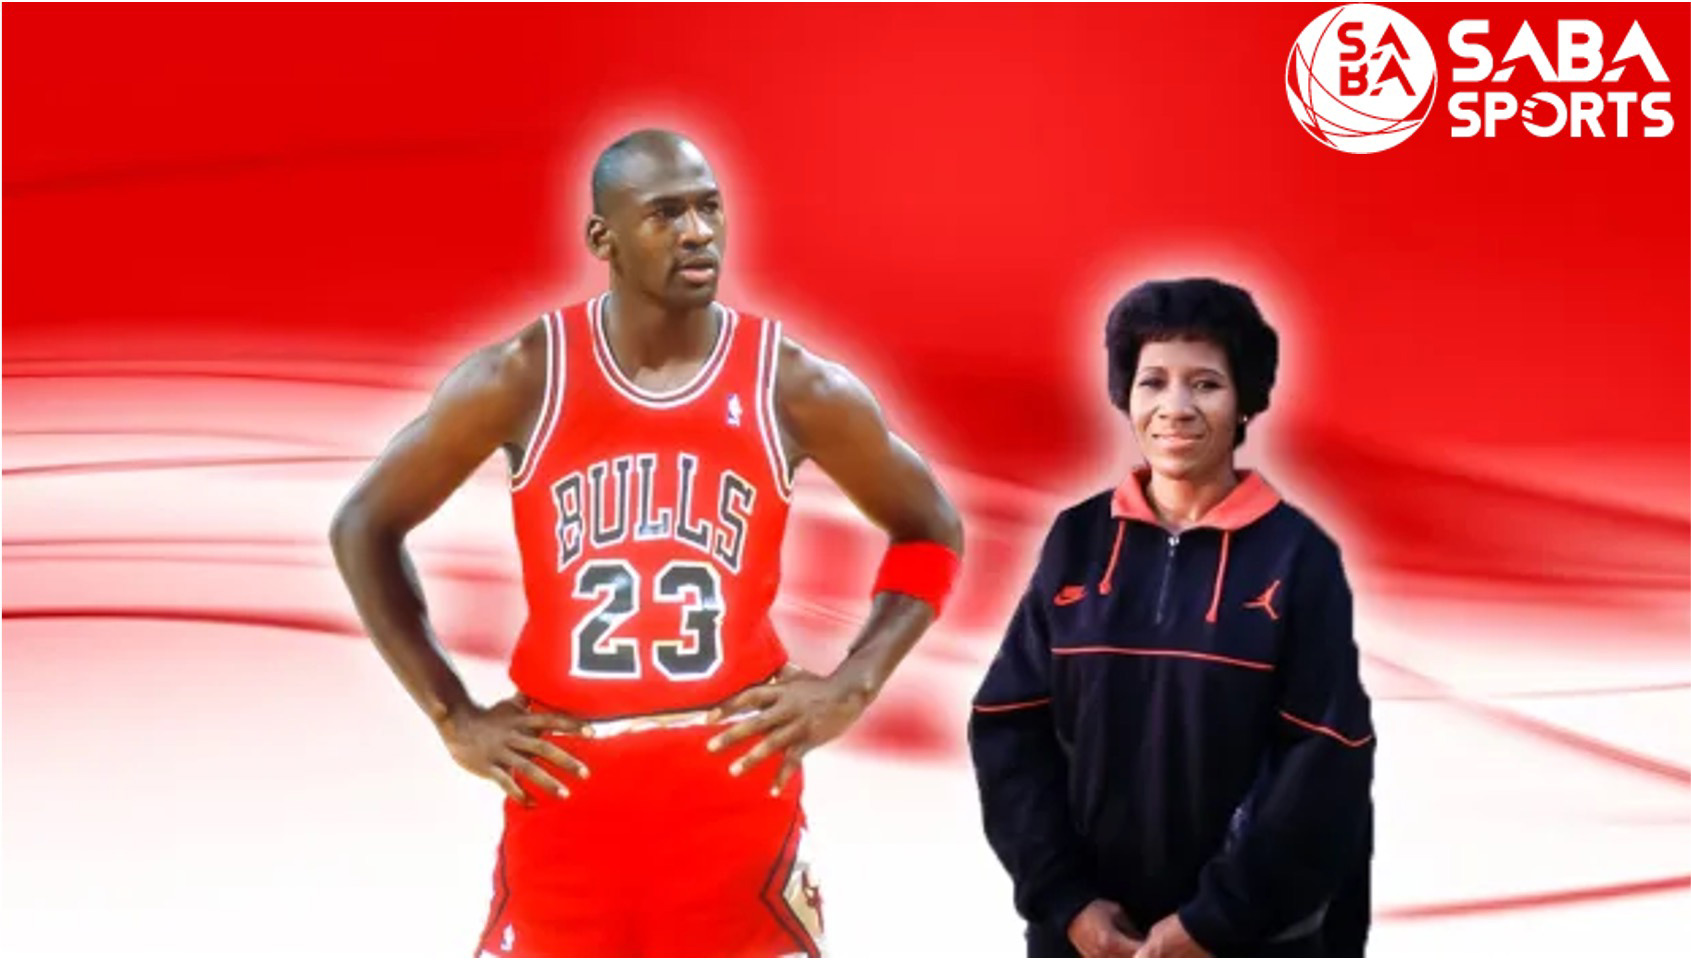 Basketball Team - When Michael Jordan Didn't Make Varsity Basketball Team, His Mother's Wise  Words: 'Work Harder and Hit the Gym'